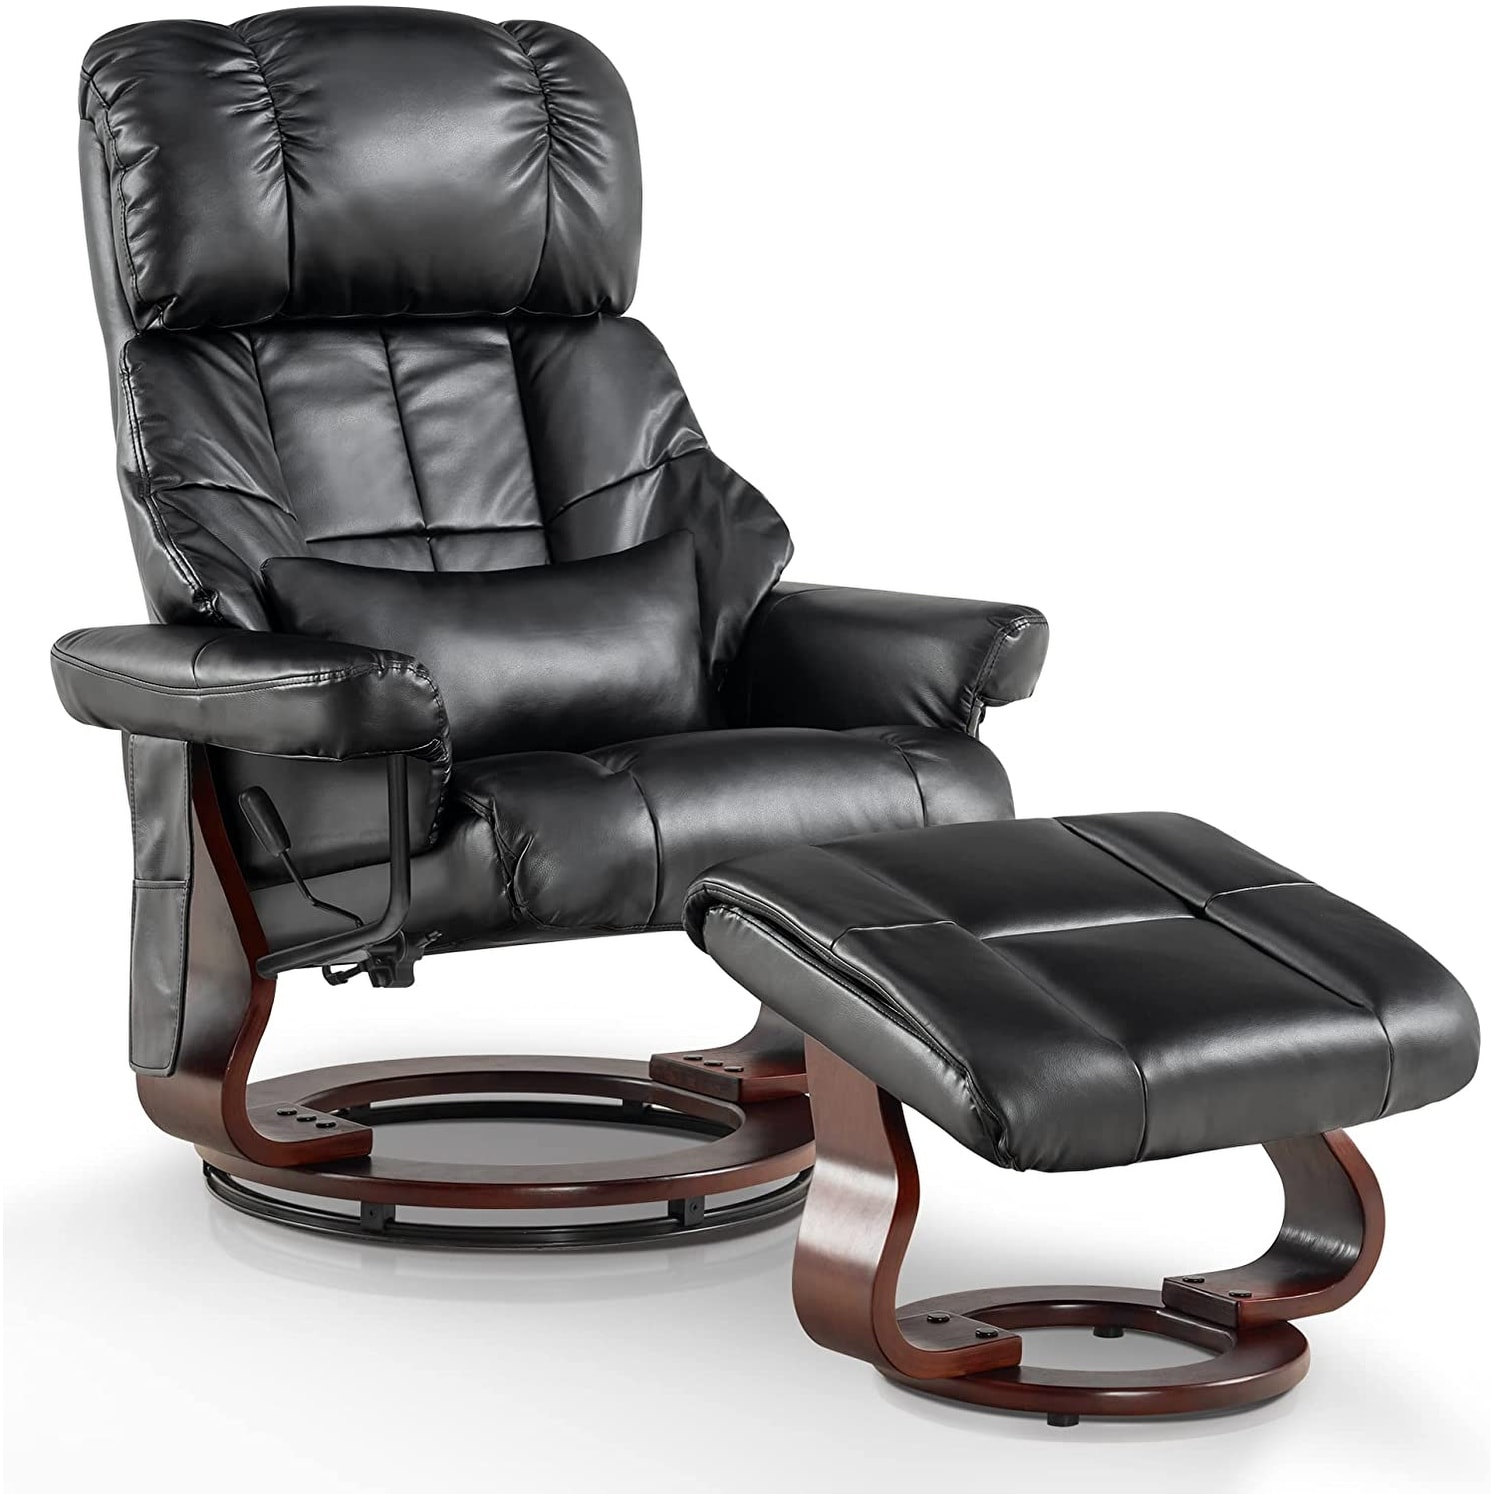 https://ak1.ostkcdn.com/images/products/is/images/direct/7d65b2ea6eff8a72c7556339e7fbb4a375402ba3/Mcombo-Recliner-Chair-with-Ottoman-with-Vibration-Massage-and-Lumbar-Pillow%2C-360-Degree-Swivel-Wood-Base%2C-Faux-Leather-9068.jpg